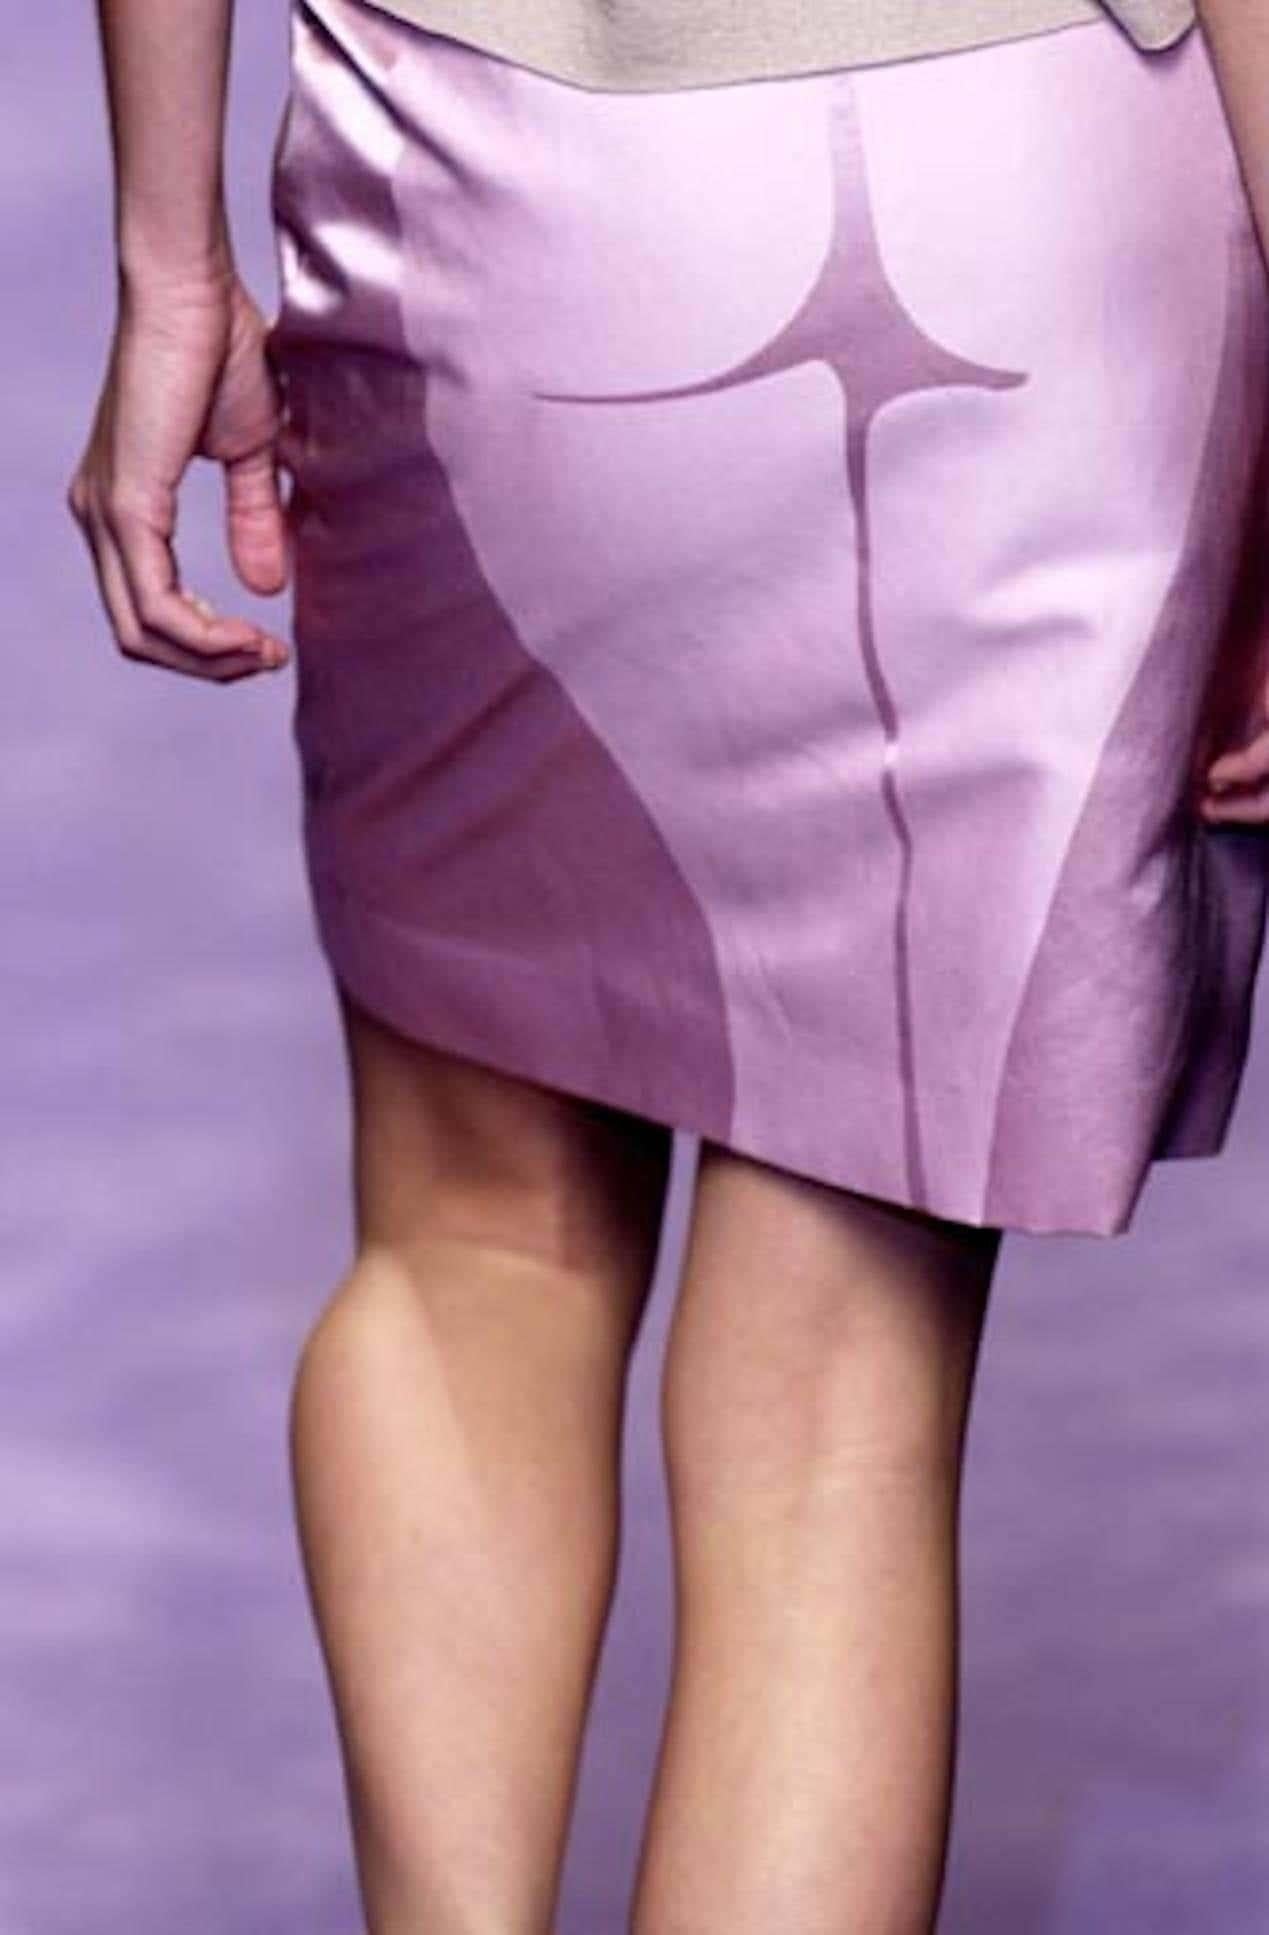 Presenting a fabulous dusty lavender silhouette Yves Saint Laurent Rive Gauche skirt, designed by Tom Ford. From the Spring/Summer 2003 collection, this skirt debuted in pink as part of look 6 modeled by Mariacarla Boscono. This seemingly regular